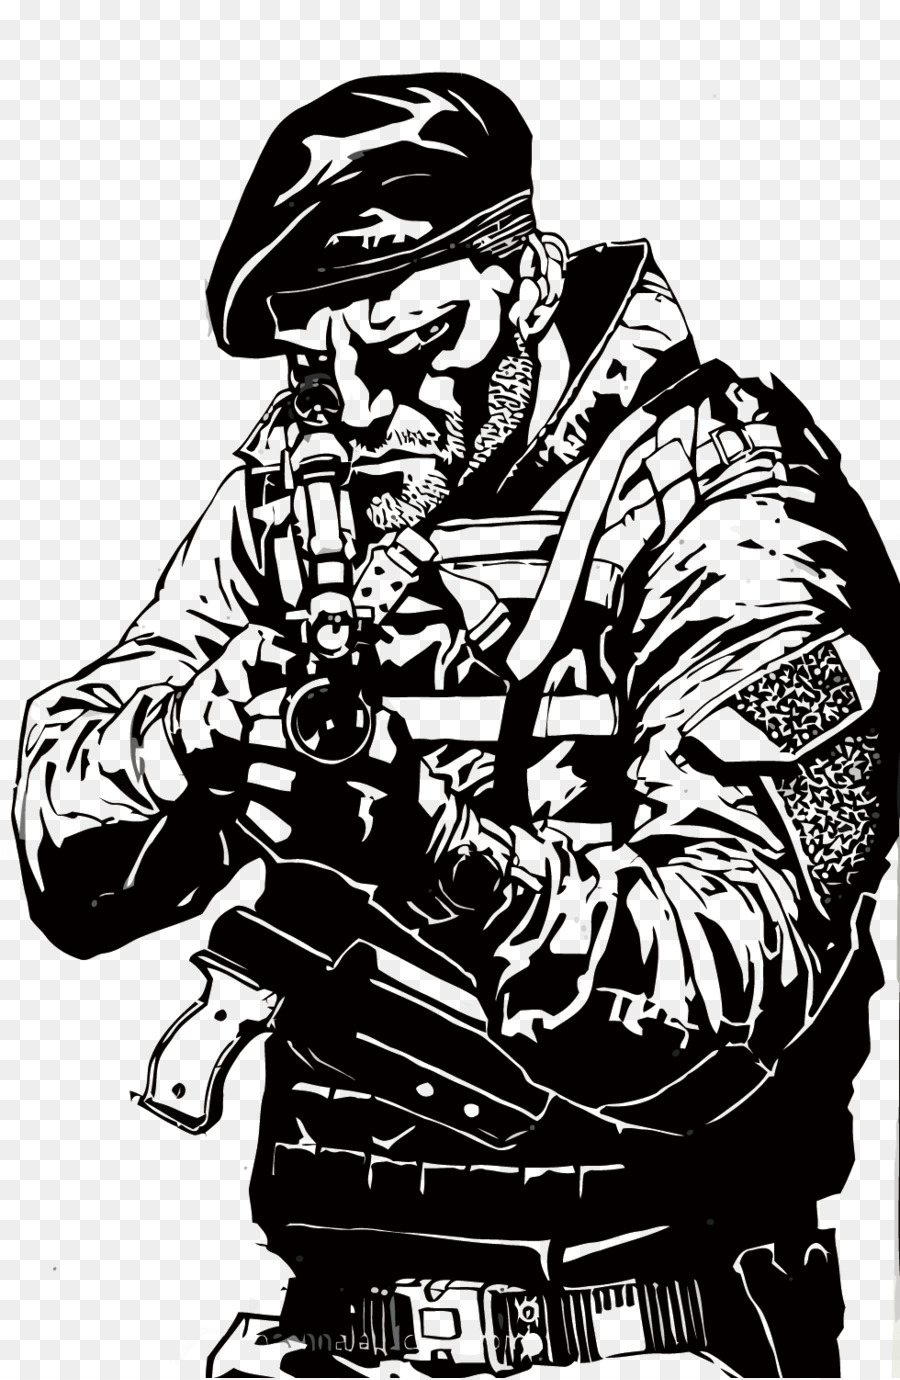 Drawing The Expendables Soldier - Vector attack the soldiers png download - 980*1500 - Free Transparent Drawing png Download.